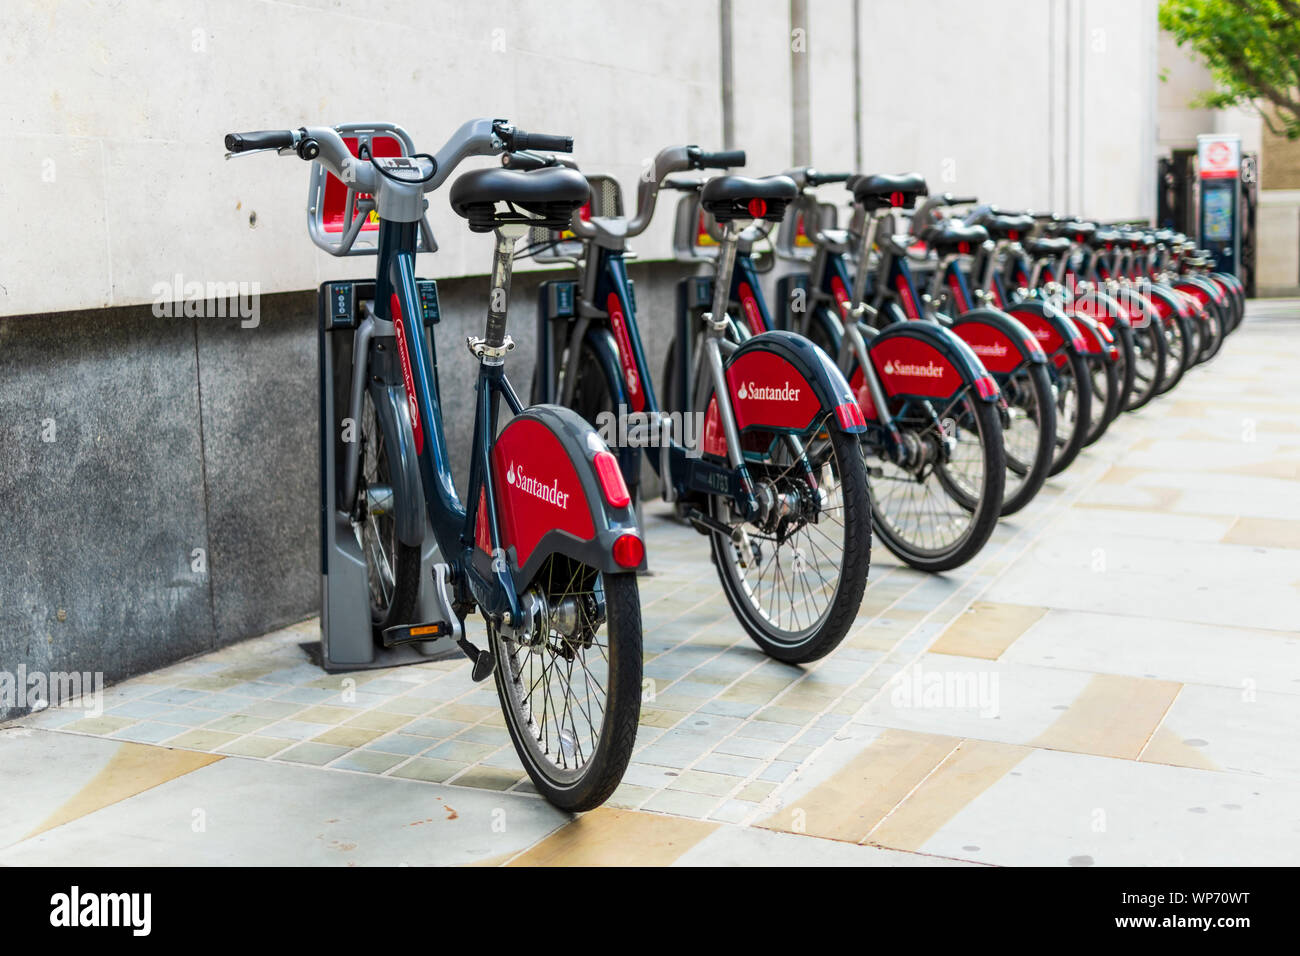 Santander Cycles parked in a docking station, London Stock Photo